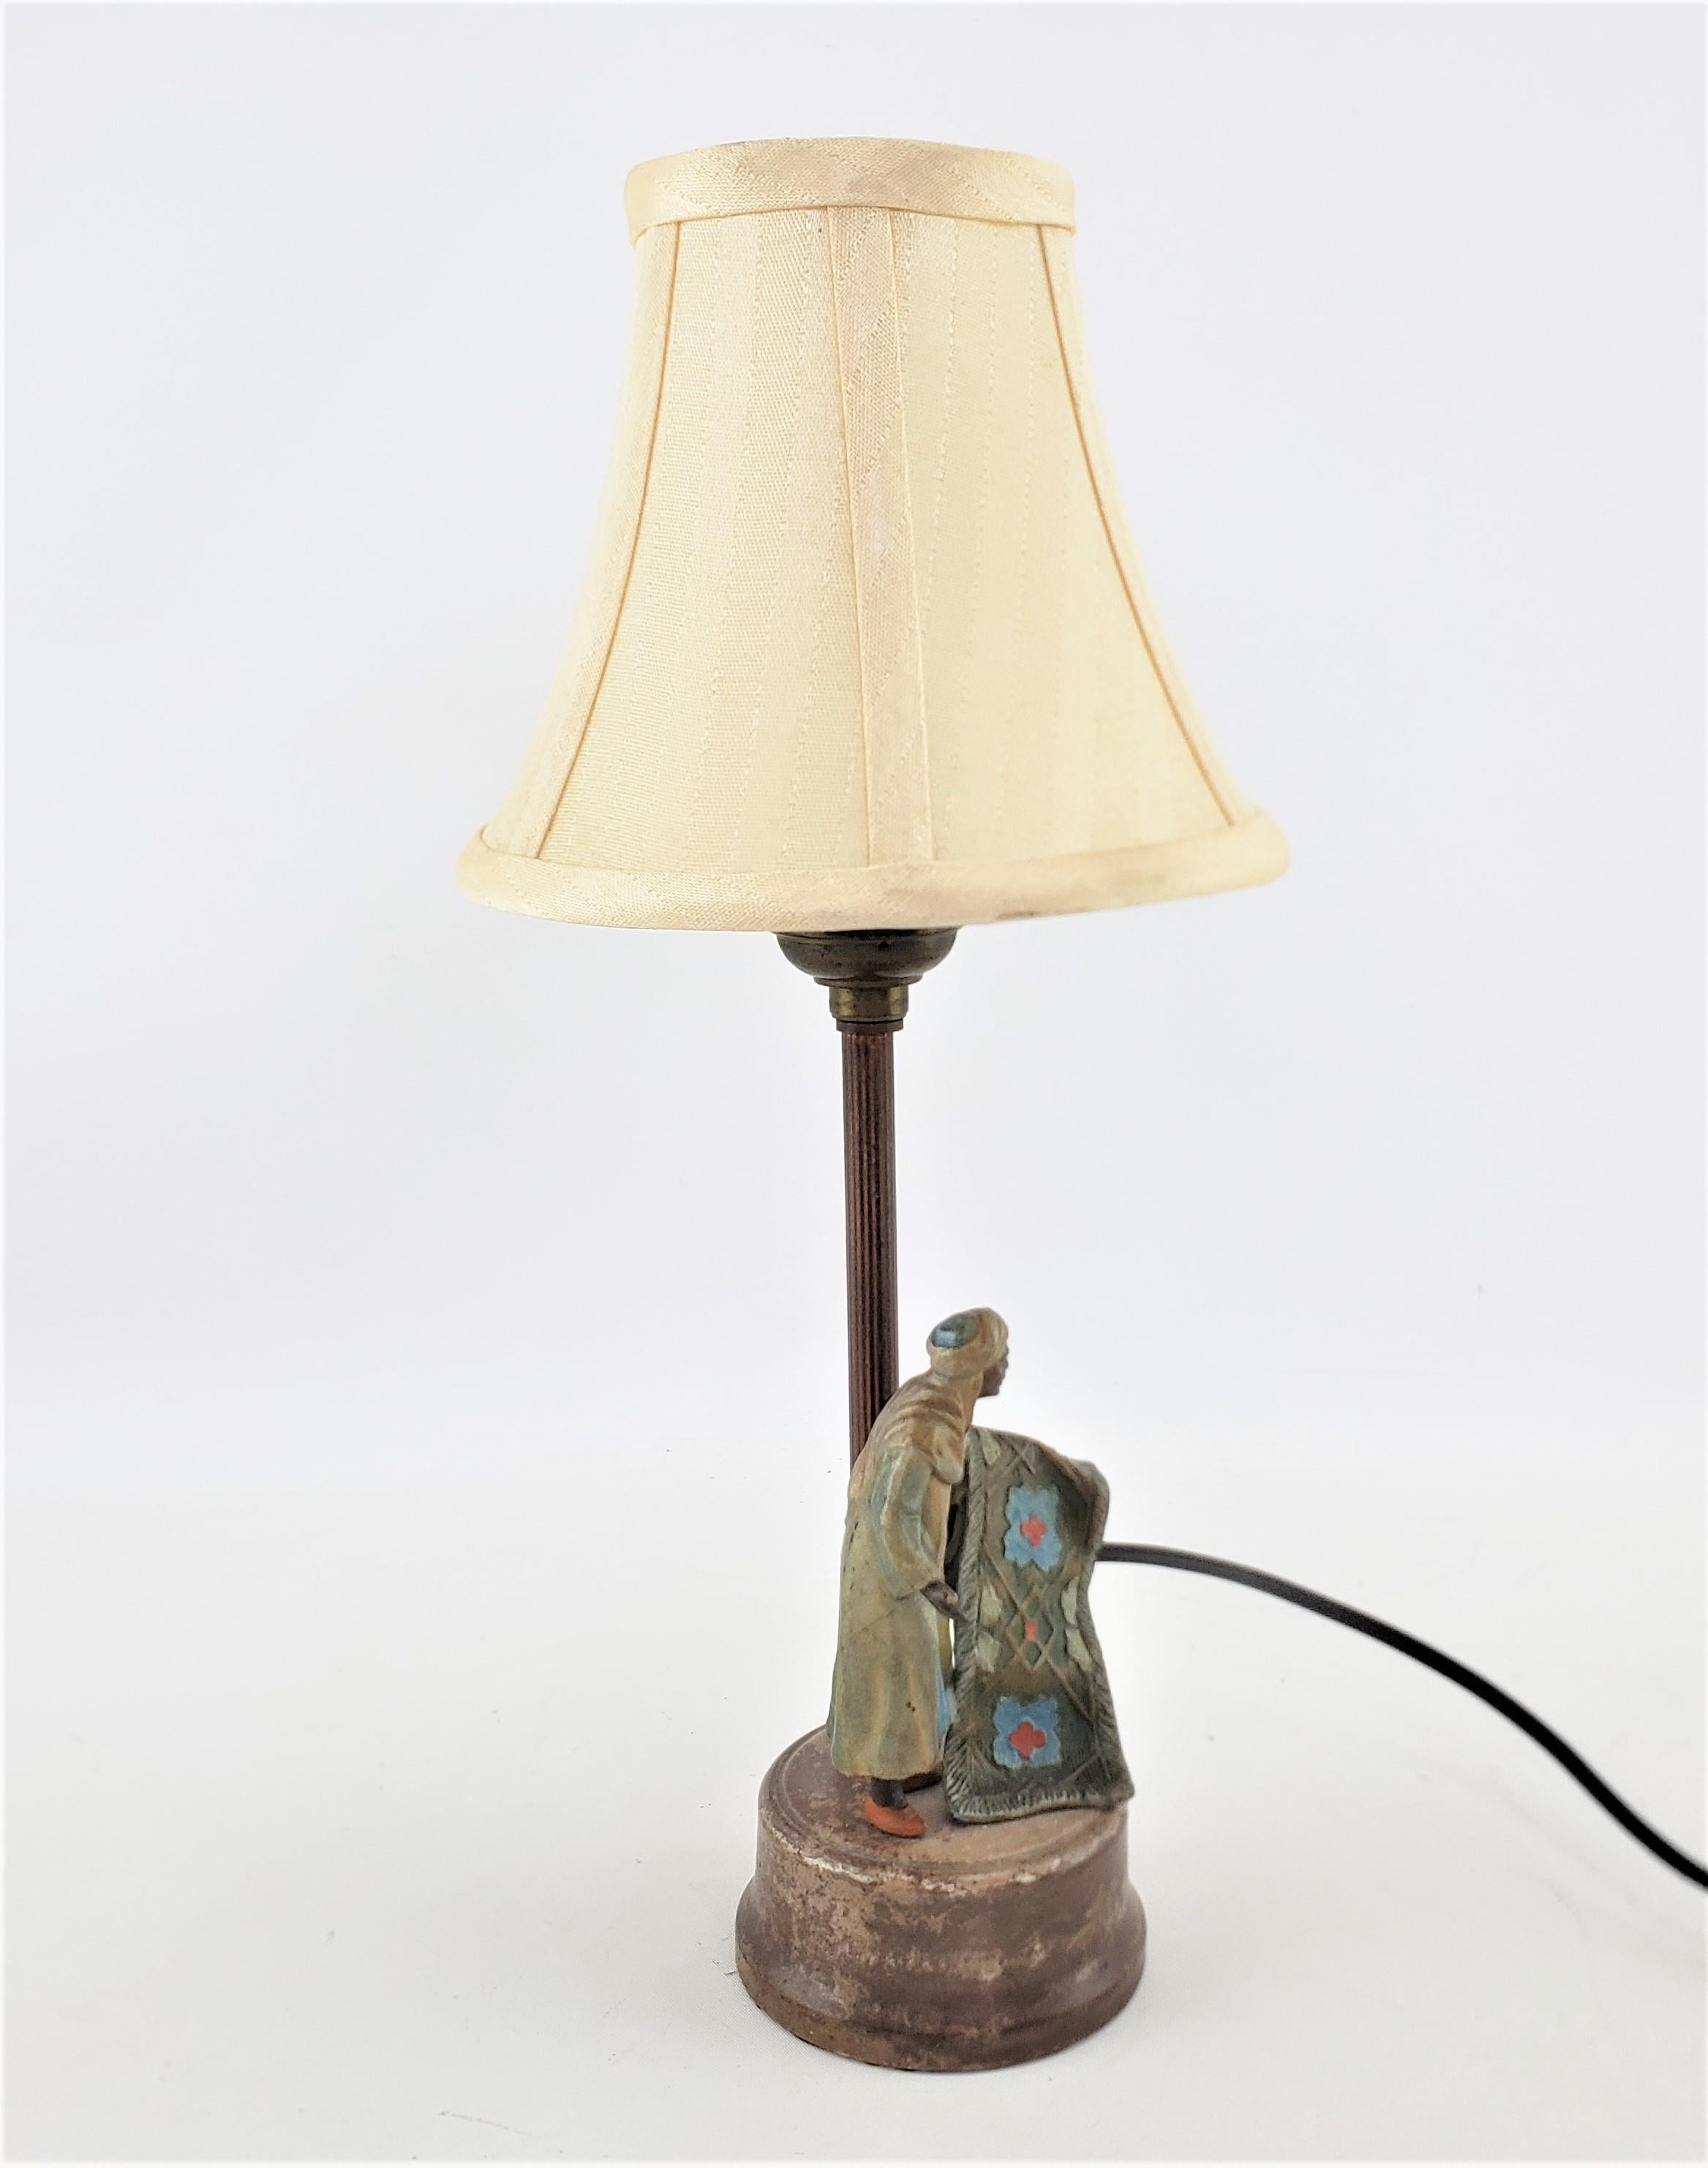 Small Antique Art Deco Cast & Cold-Painted Spelter Table Lamp with Arabian Motif In Good Condition For Sale In Hamilton, Ontario